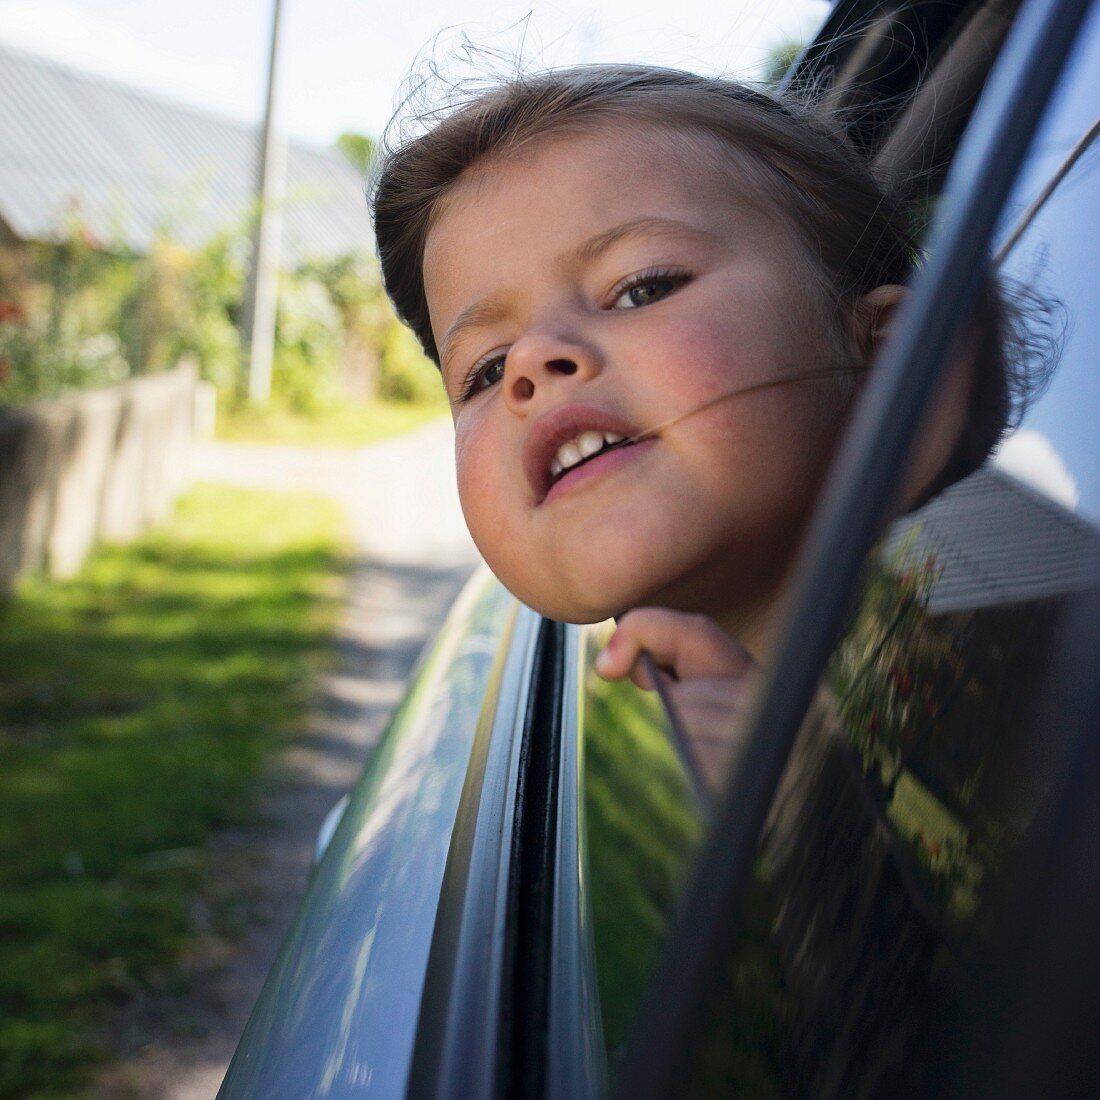 A little girl with her head out of a car window